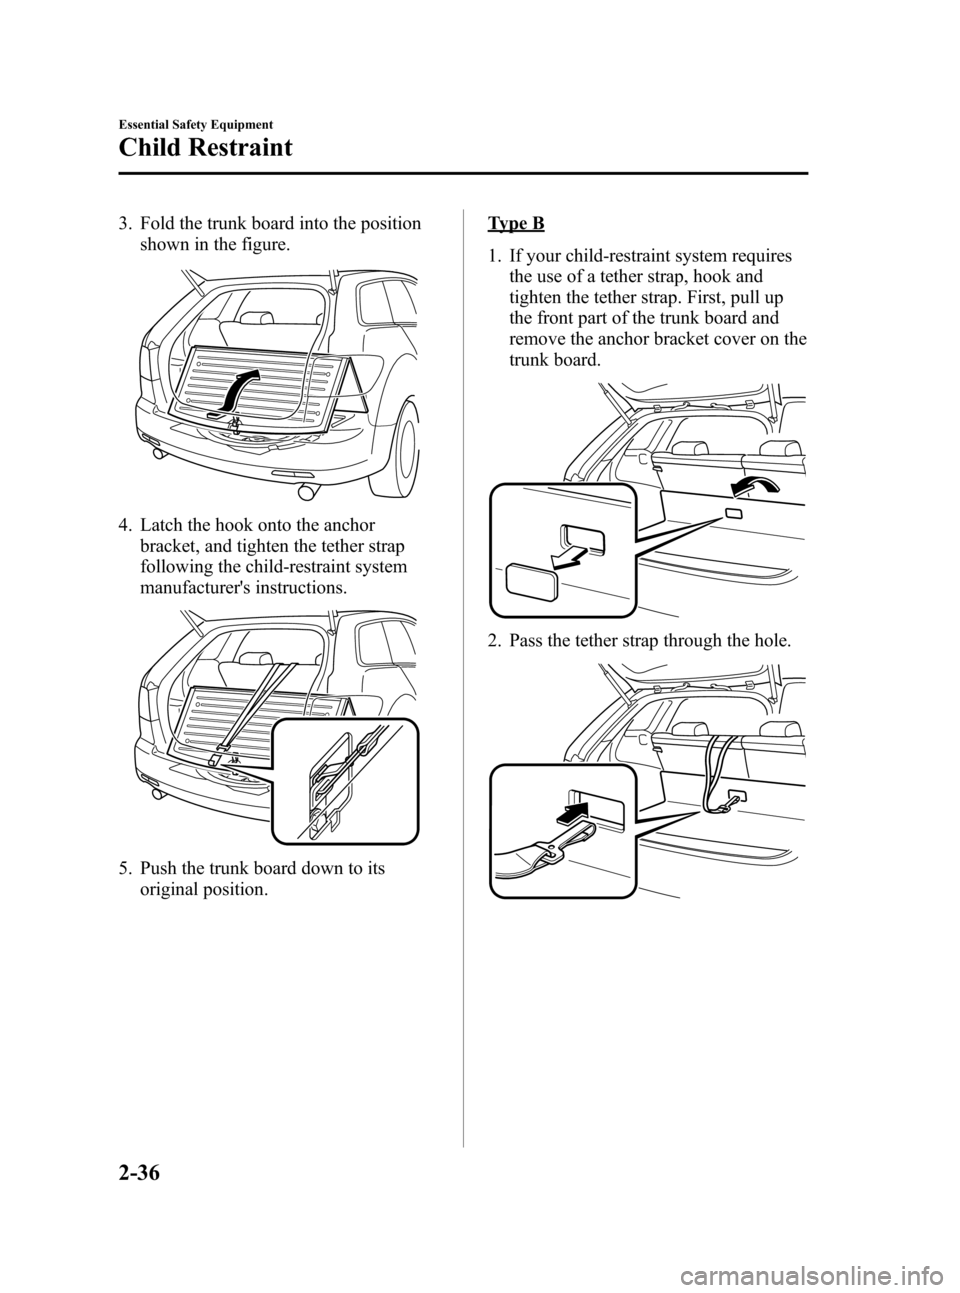 MAZDA MODEL CX-7 2009   (in English) Service Manual Black plate (48,1)
3. Fold the trunk board into the position
shown in the figure.
4. Latch the hook onto the anchor
bracket, and tighten the tether strap
following the child-restraint system
manufactu